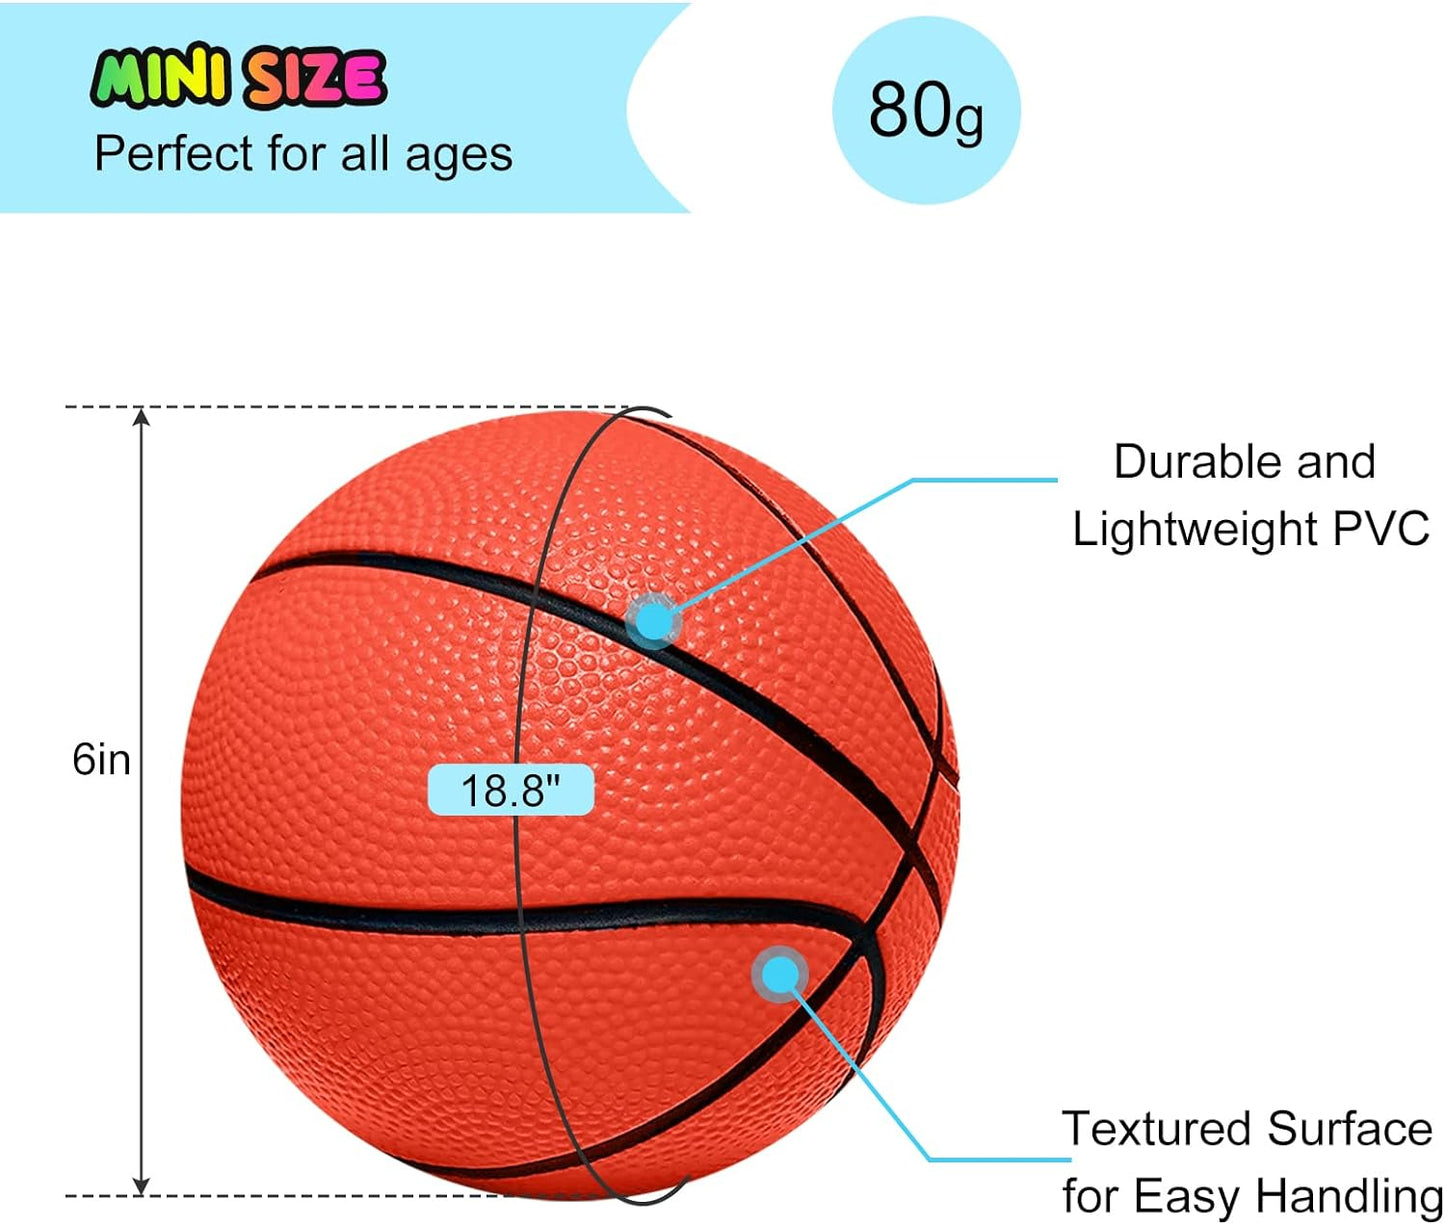 Mini Basketballs, 5 Pack 6" Basketball Set with Pump Durable PVC Basketballs for Mini Basketball Hoop for Toddlers Kids Teenagers for Pool, Indoors, Outdoors